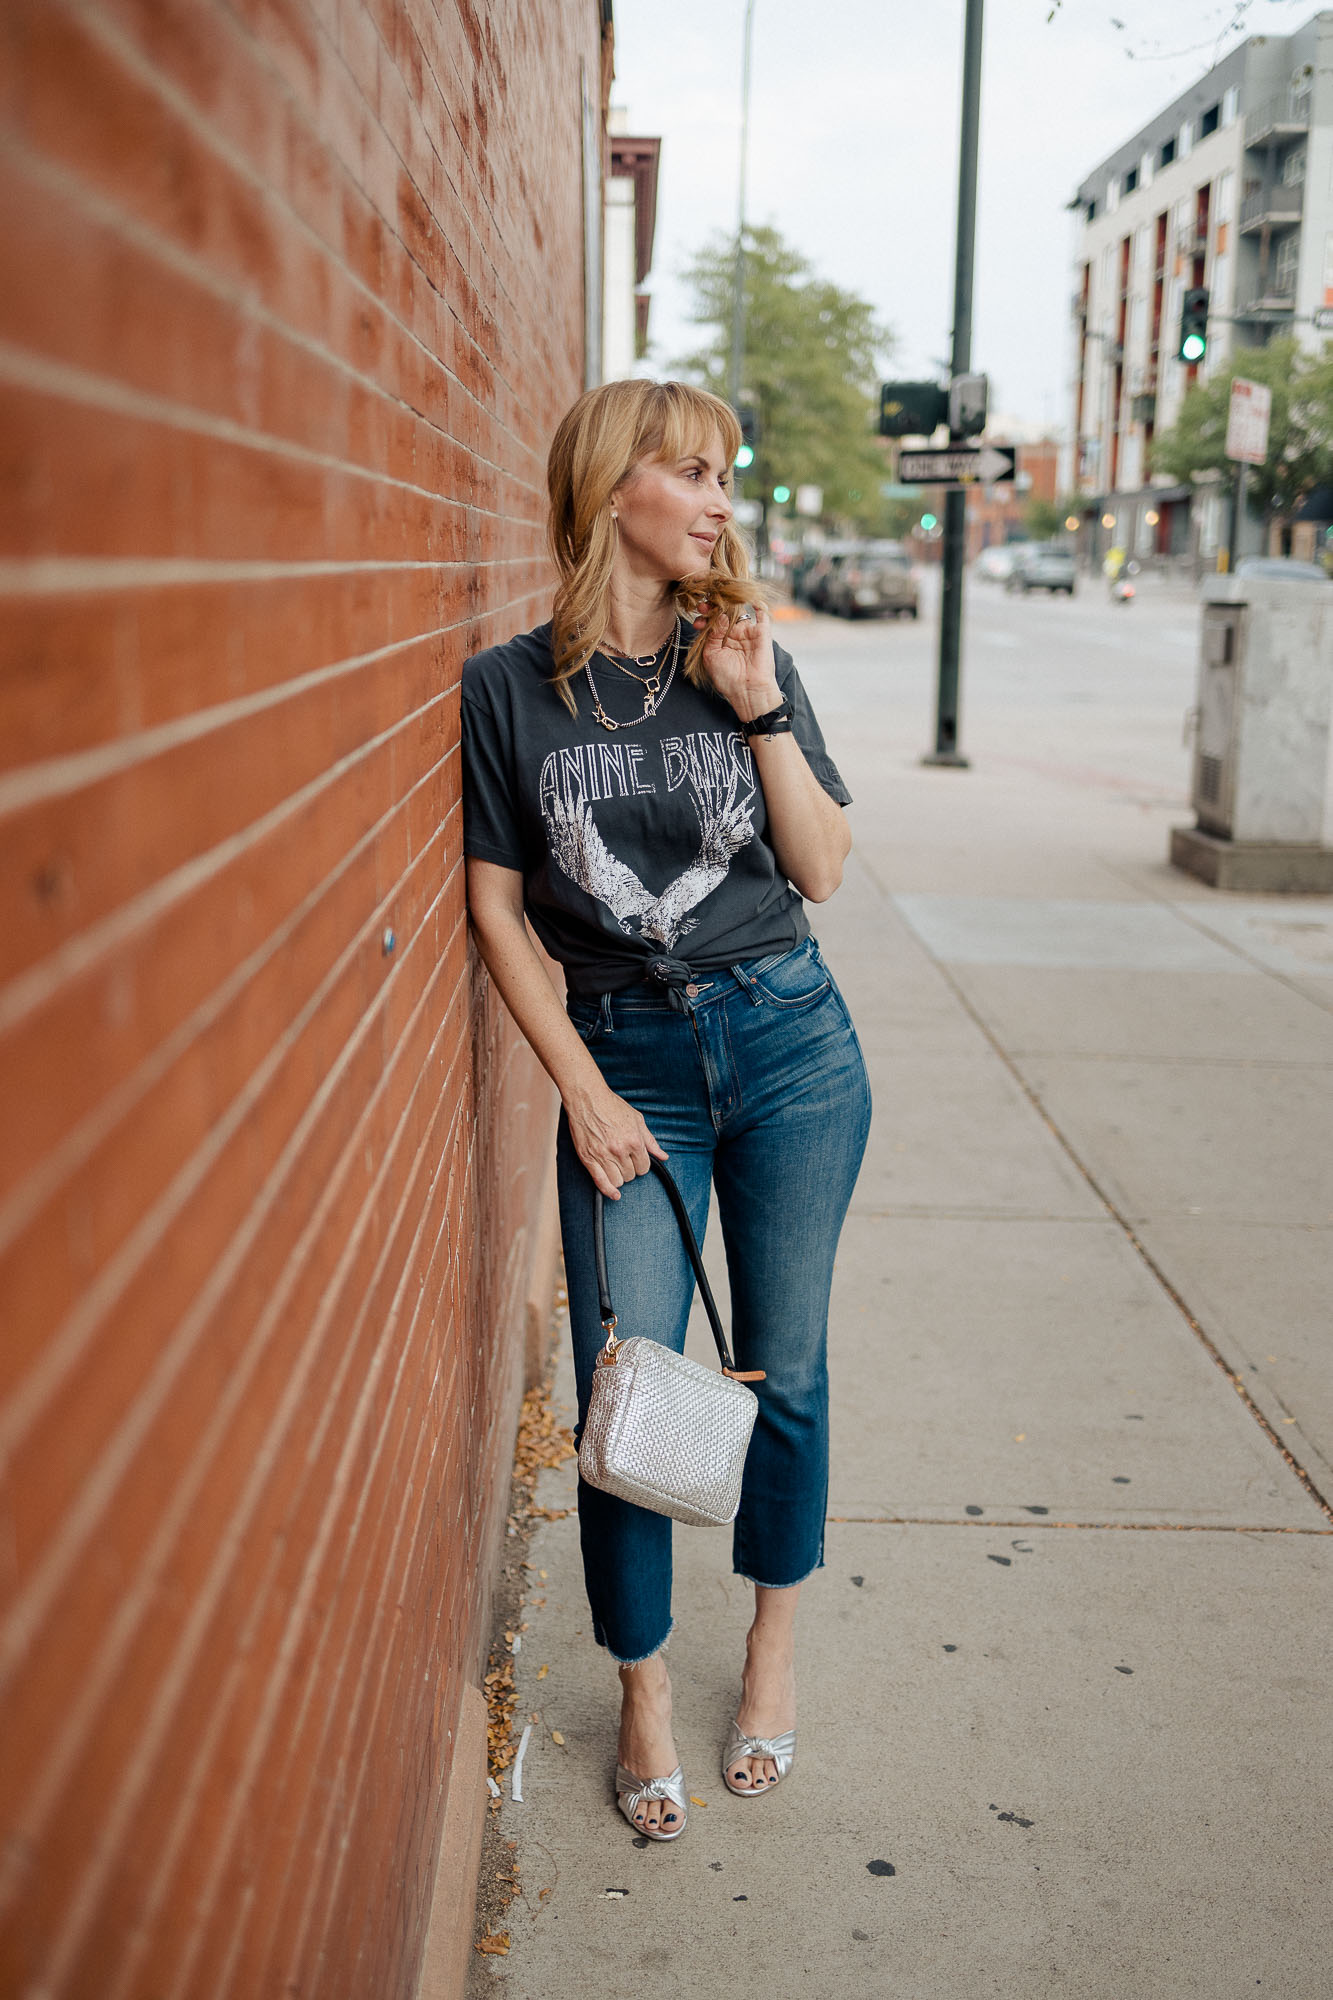 Wearing the Anine Bing washed black eagle graphic tee with Mother jeans and a silver bag and pumps.